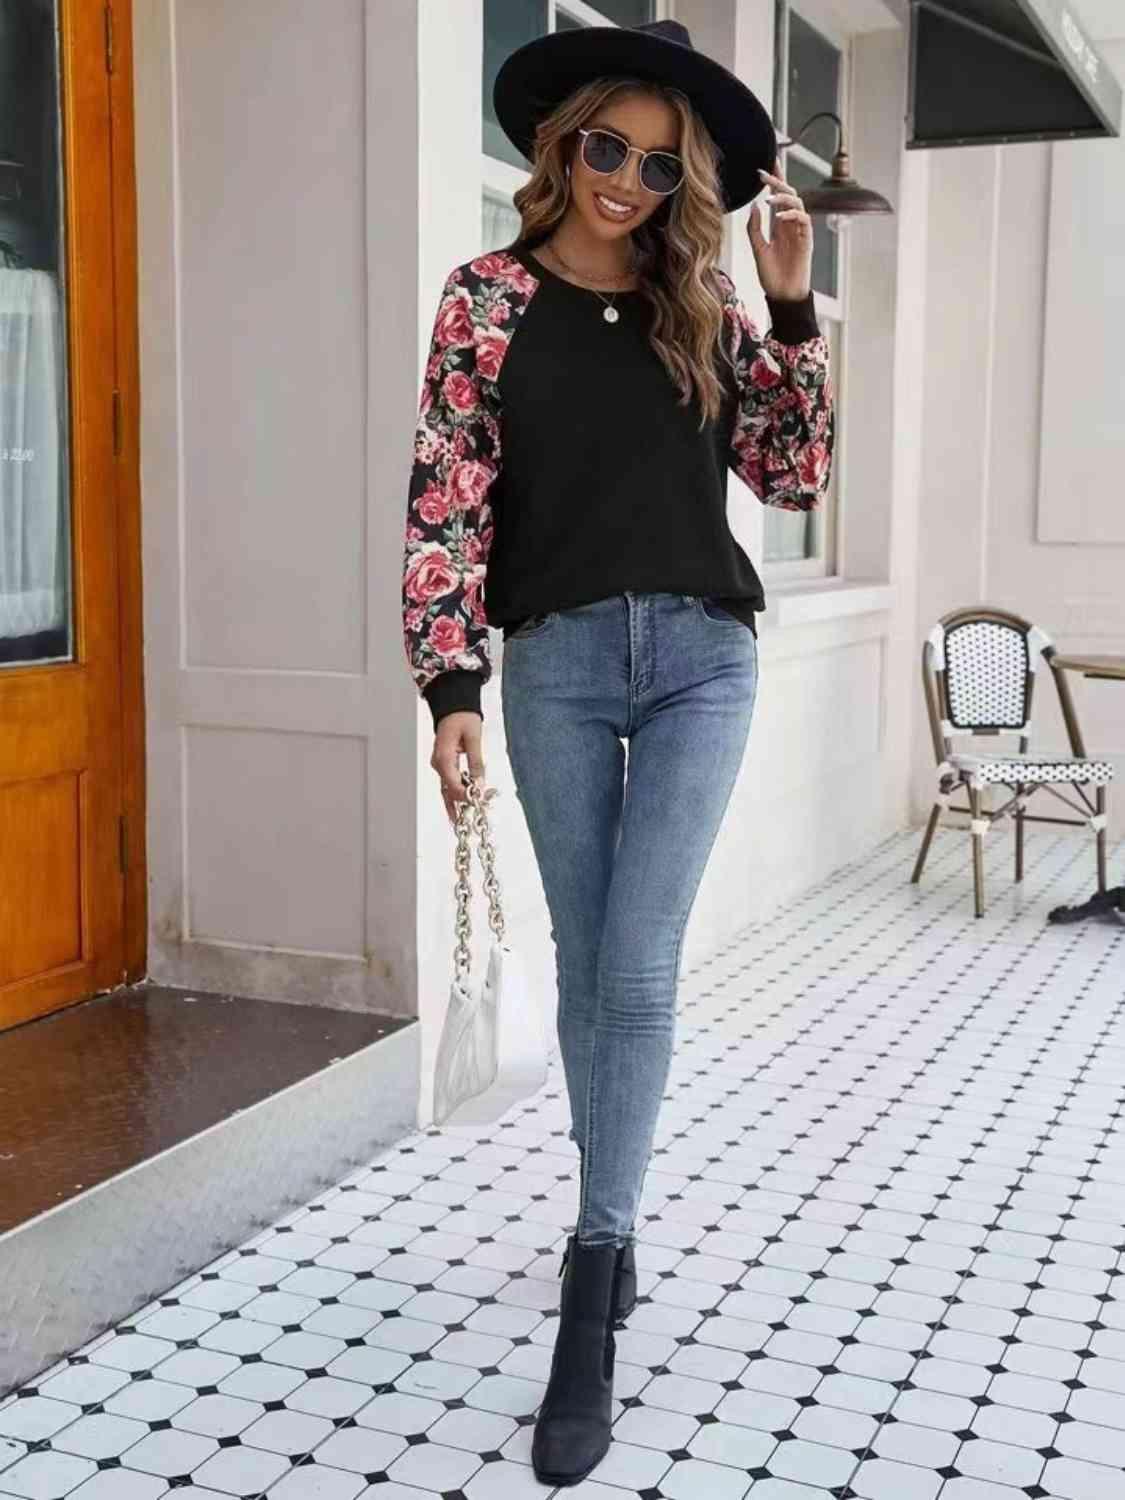 a woman walking down a sidewalk wearing a hat and jeans